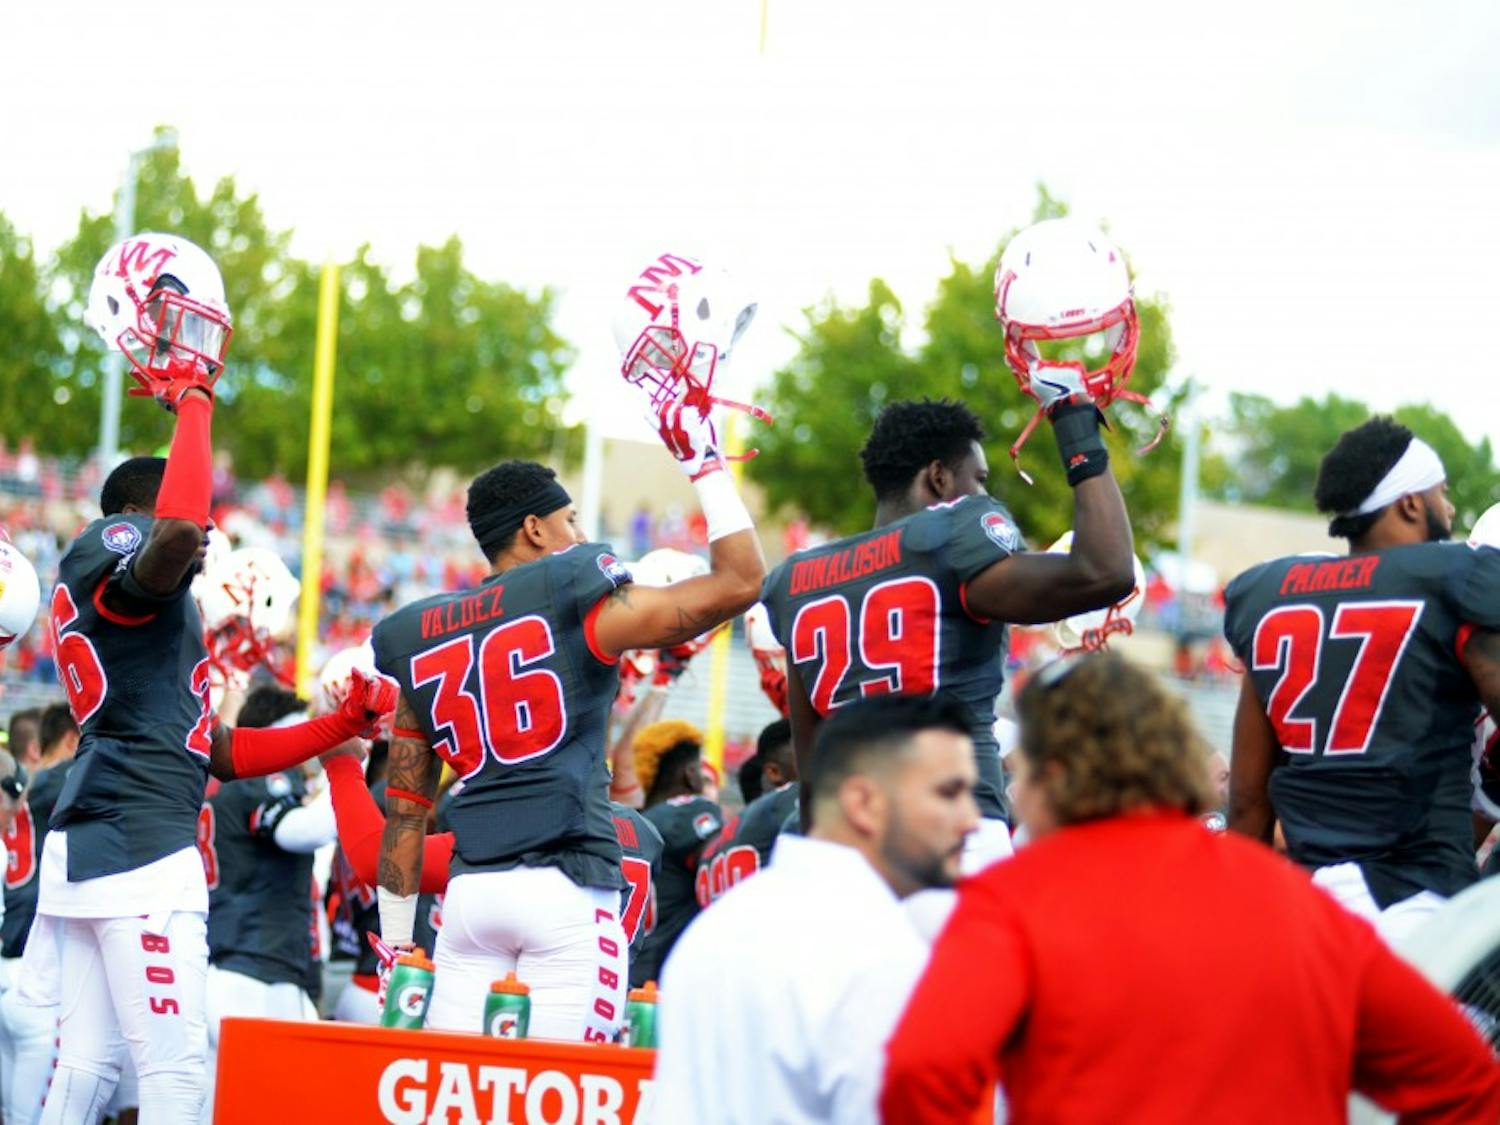 UNM football players raise their helmets in a game against San Jose State at University Stadium on Saturday, Oct. 1, 2016. After going 8-4 on the year, New Mexico will play in the Gildan New Mexico Bowl for the second consecutive season on Dec. 17 in Albuquerque.